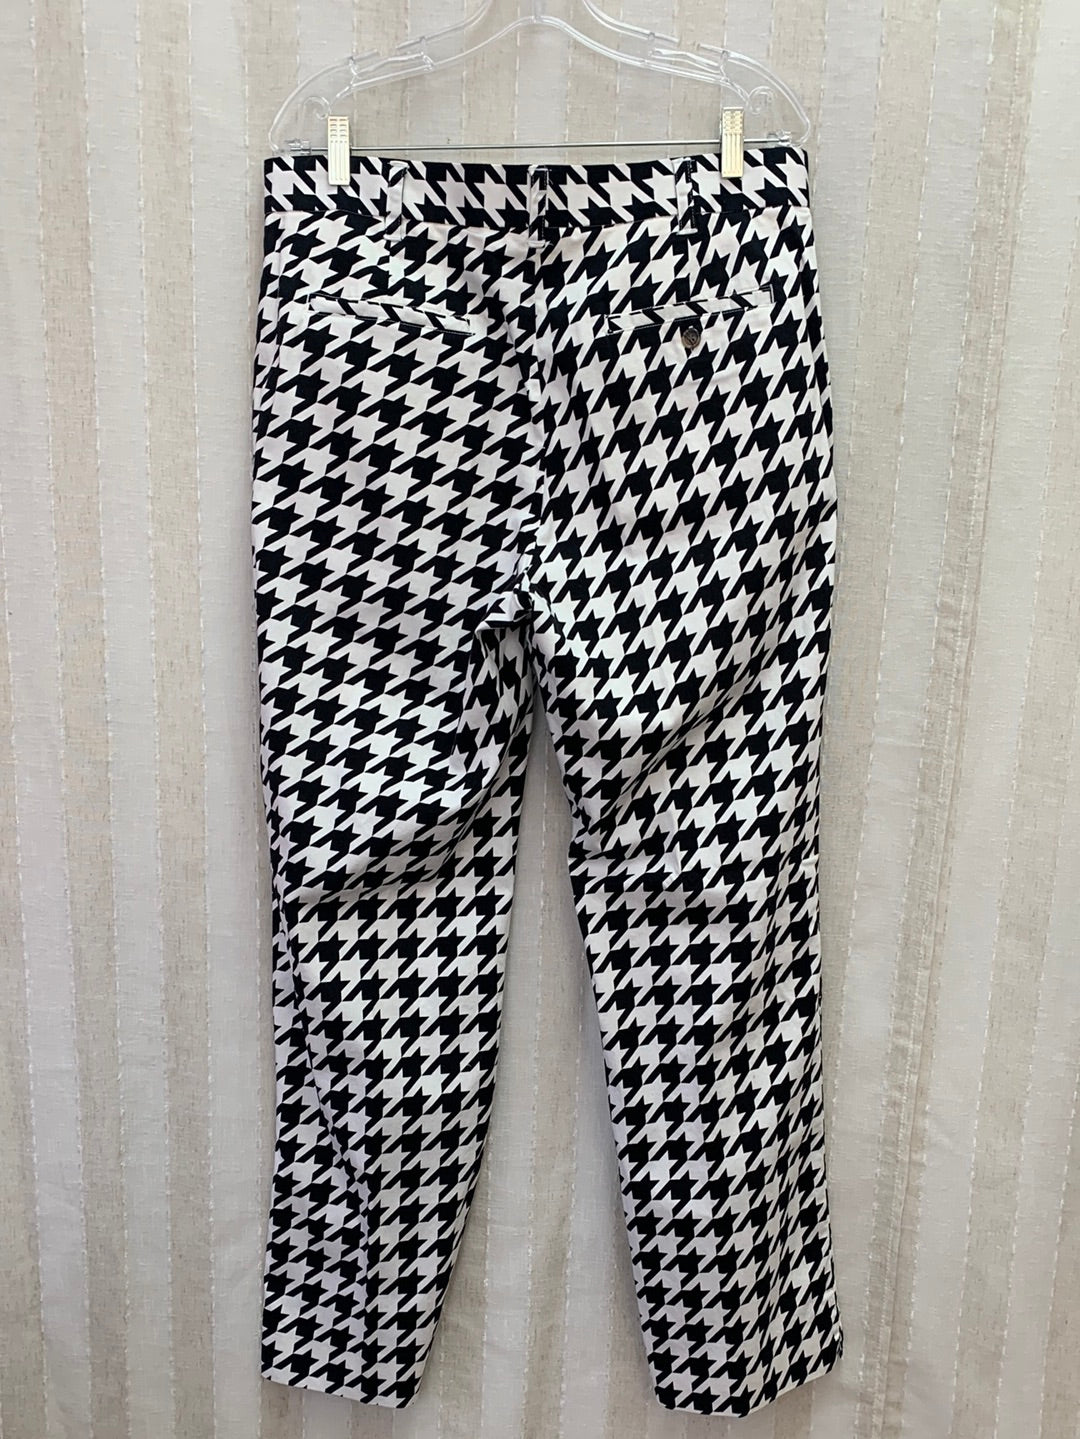 LOUDMOUTH black white houndstooth Cotton Fairway Heritage Pants - 36x32